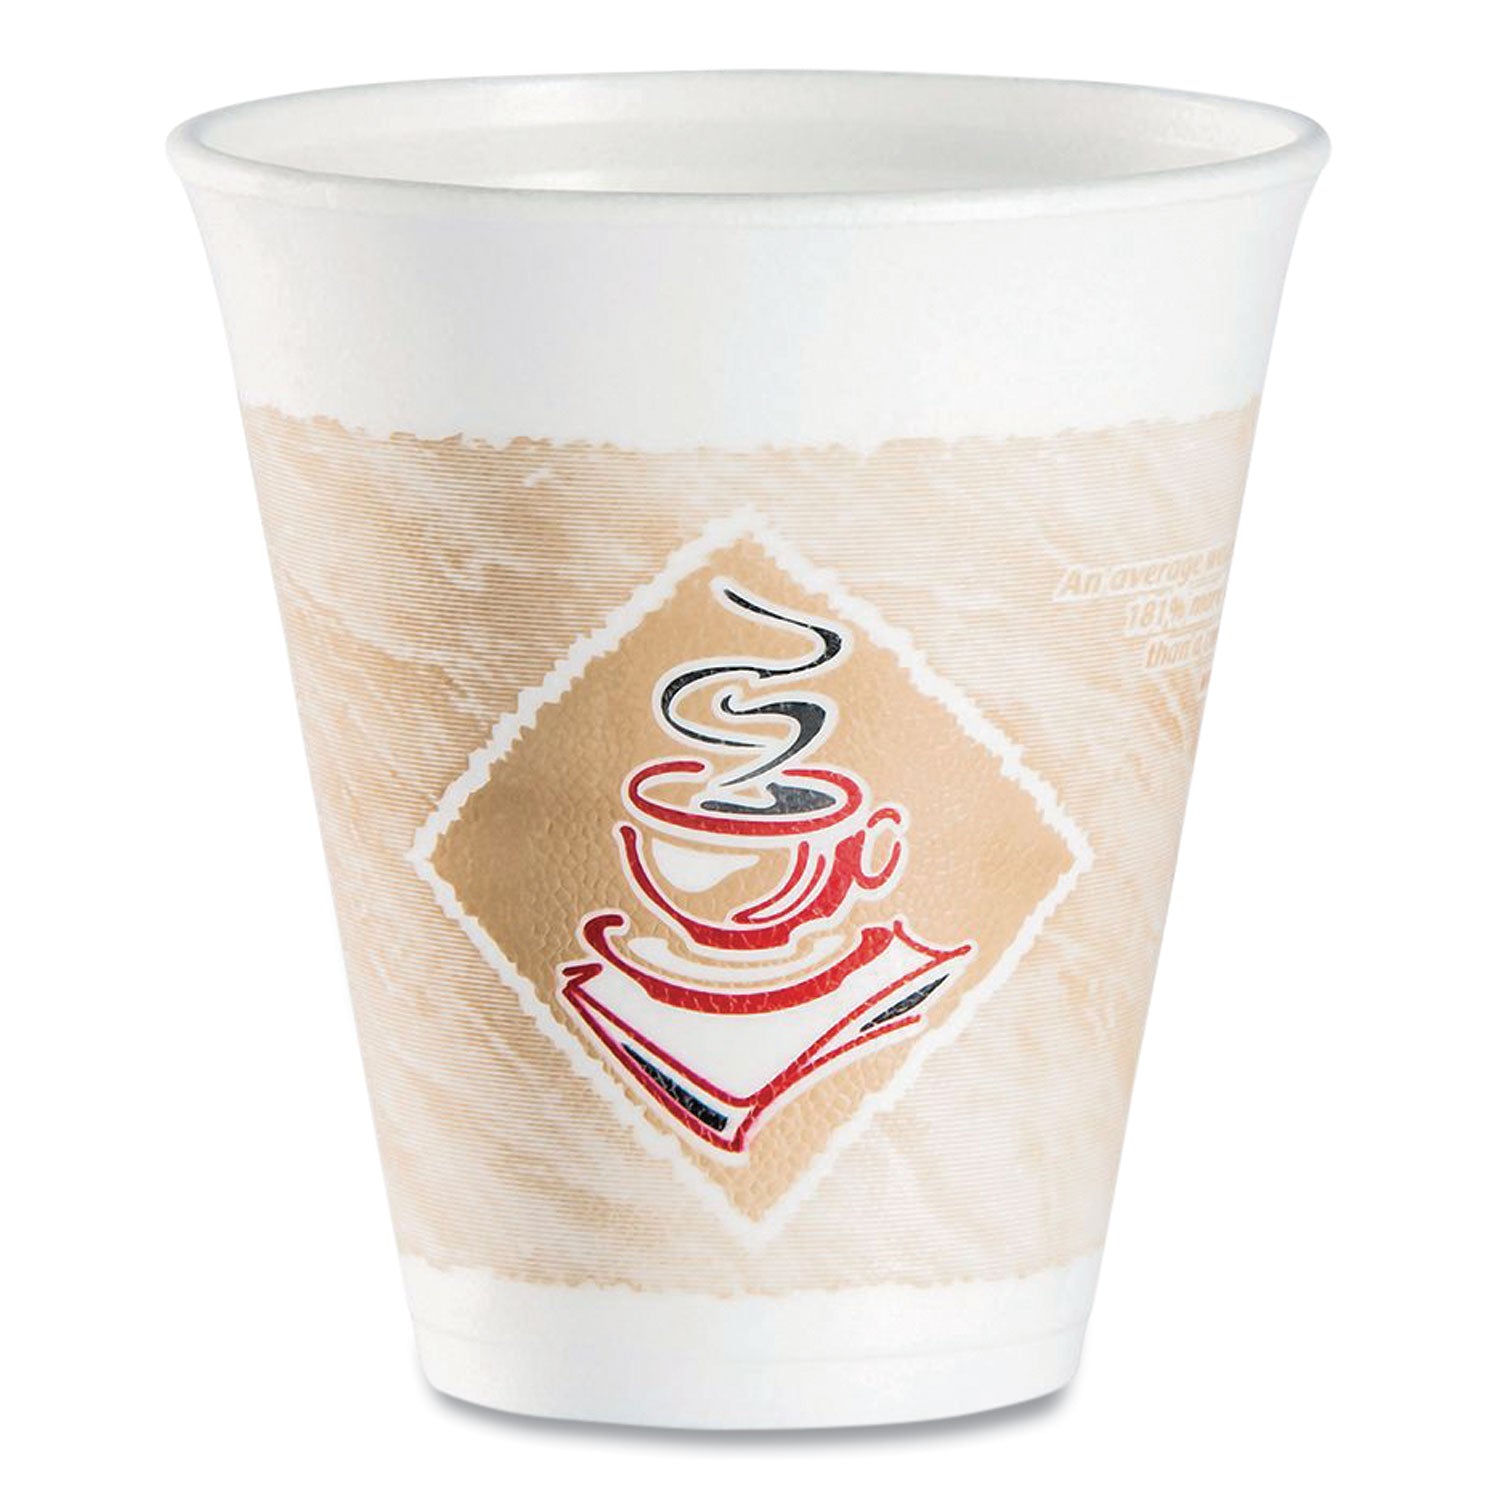 Cafe G Foam Hot/Cold Cups, 12 oz, Brown/Red/White, 1,000/Carton - 